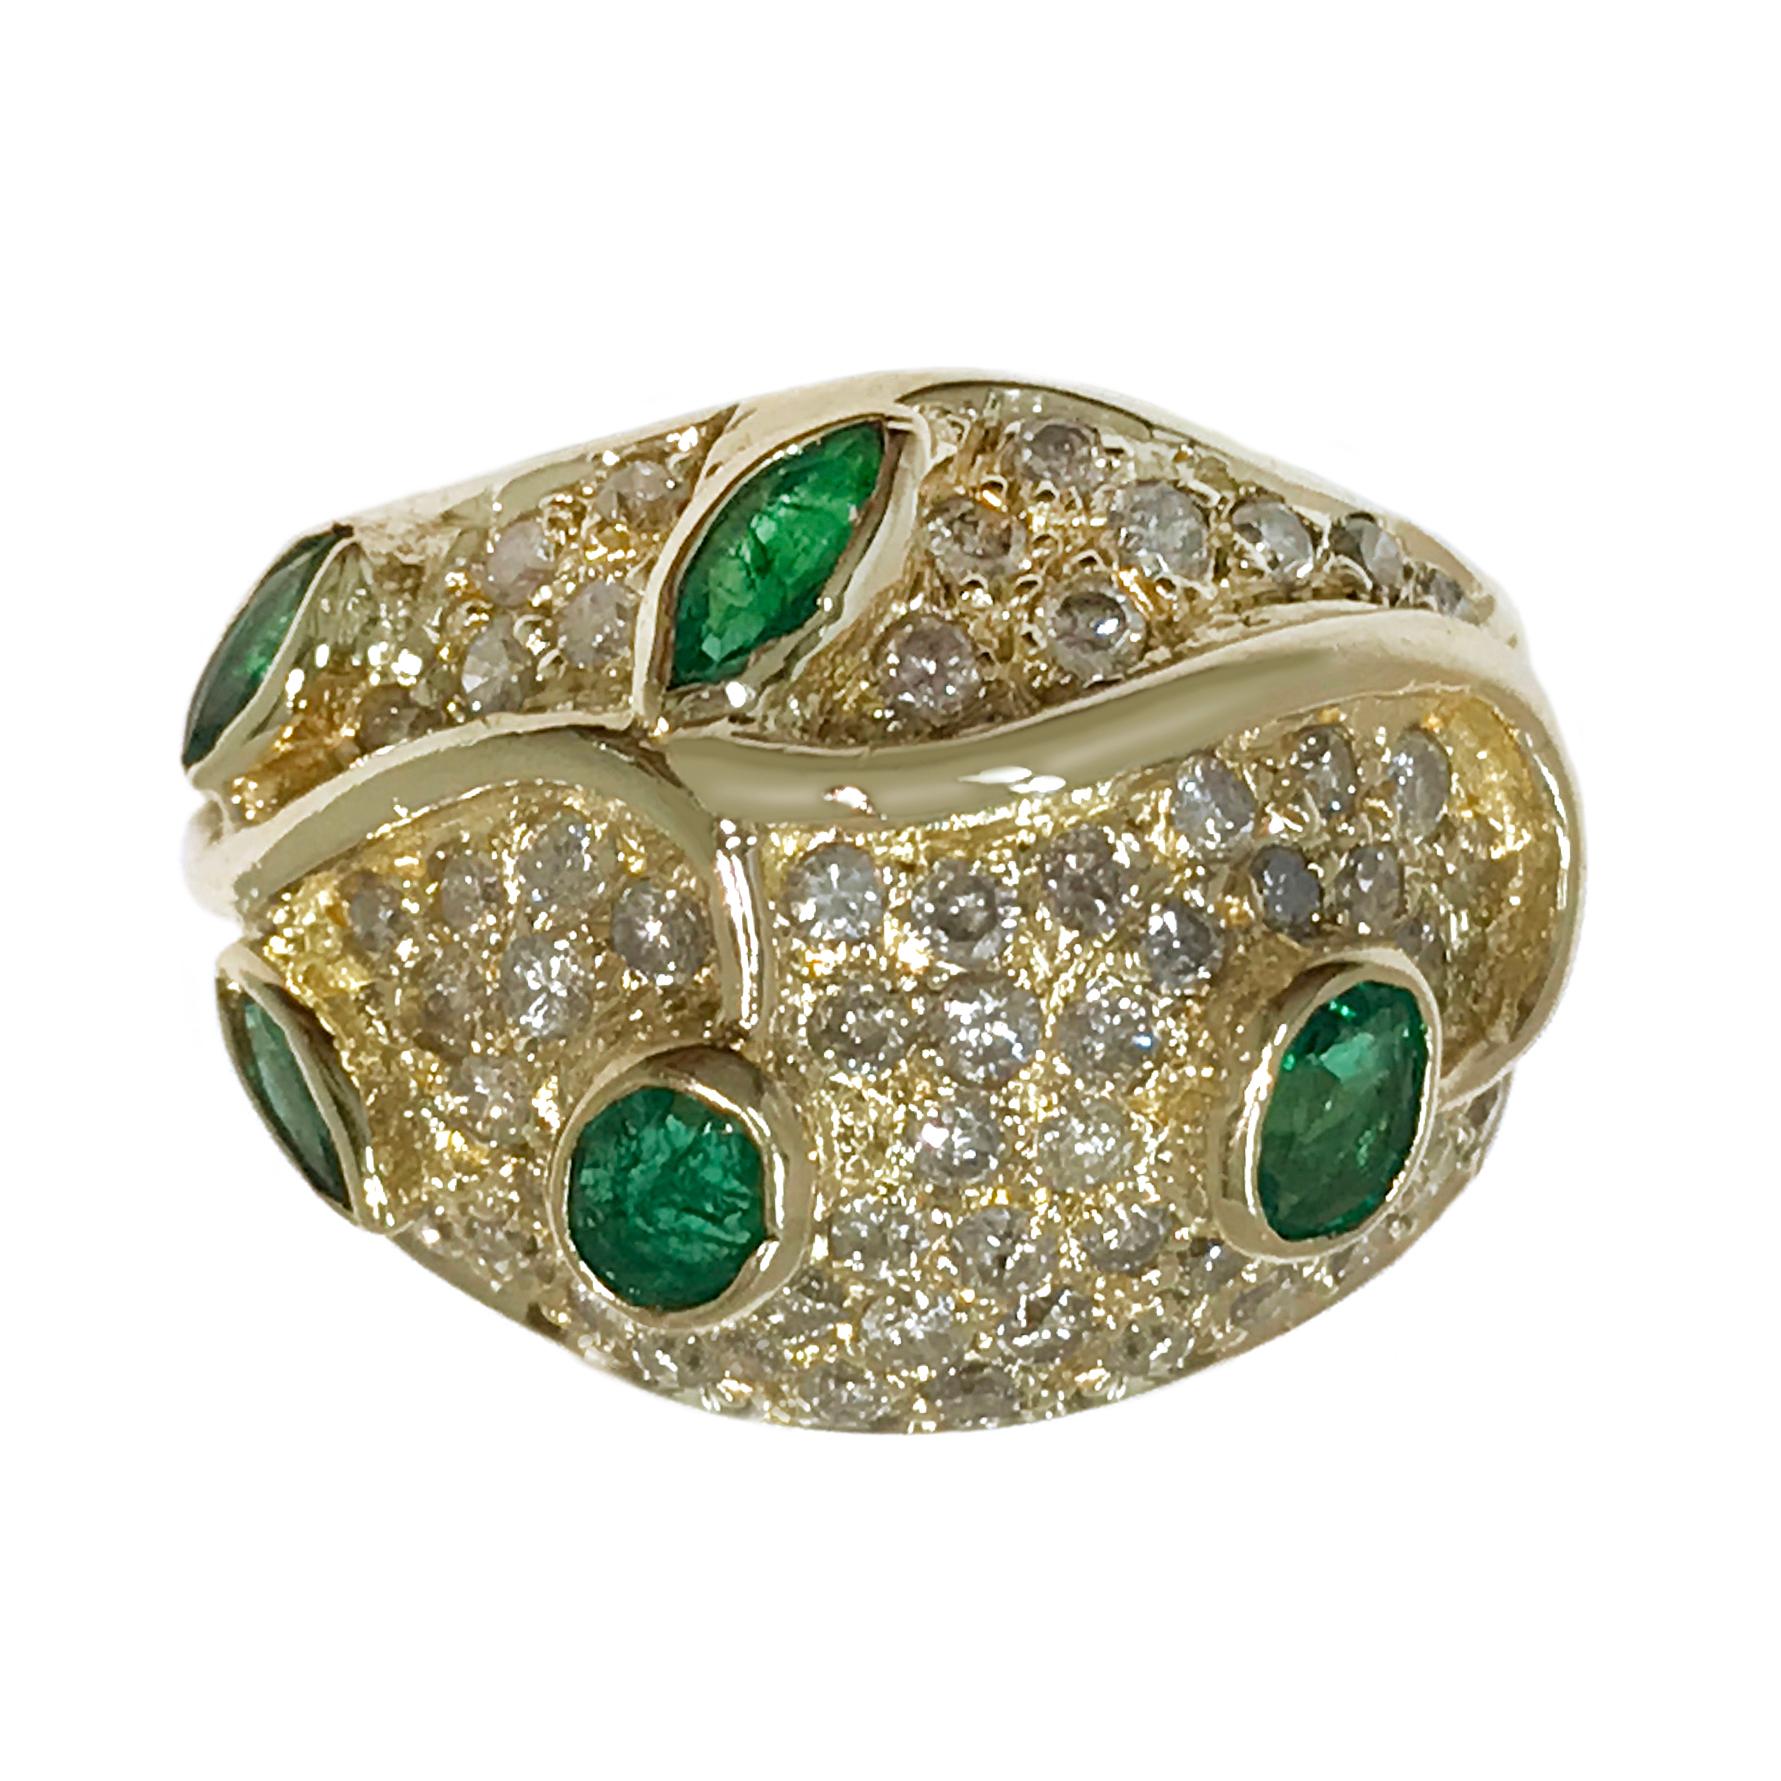 Vintage Emerald and Diamond 14 Karat Yellow Gold Cocktail Ring, Bezel/Pave. A golden vine with Emerald leaves, bezel-set, 0.64 carat adore this ring, the five Emeralds are marquise, oval, and round cut. Seventy-eight (78) pavé set Diamonds (1.56